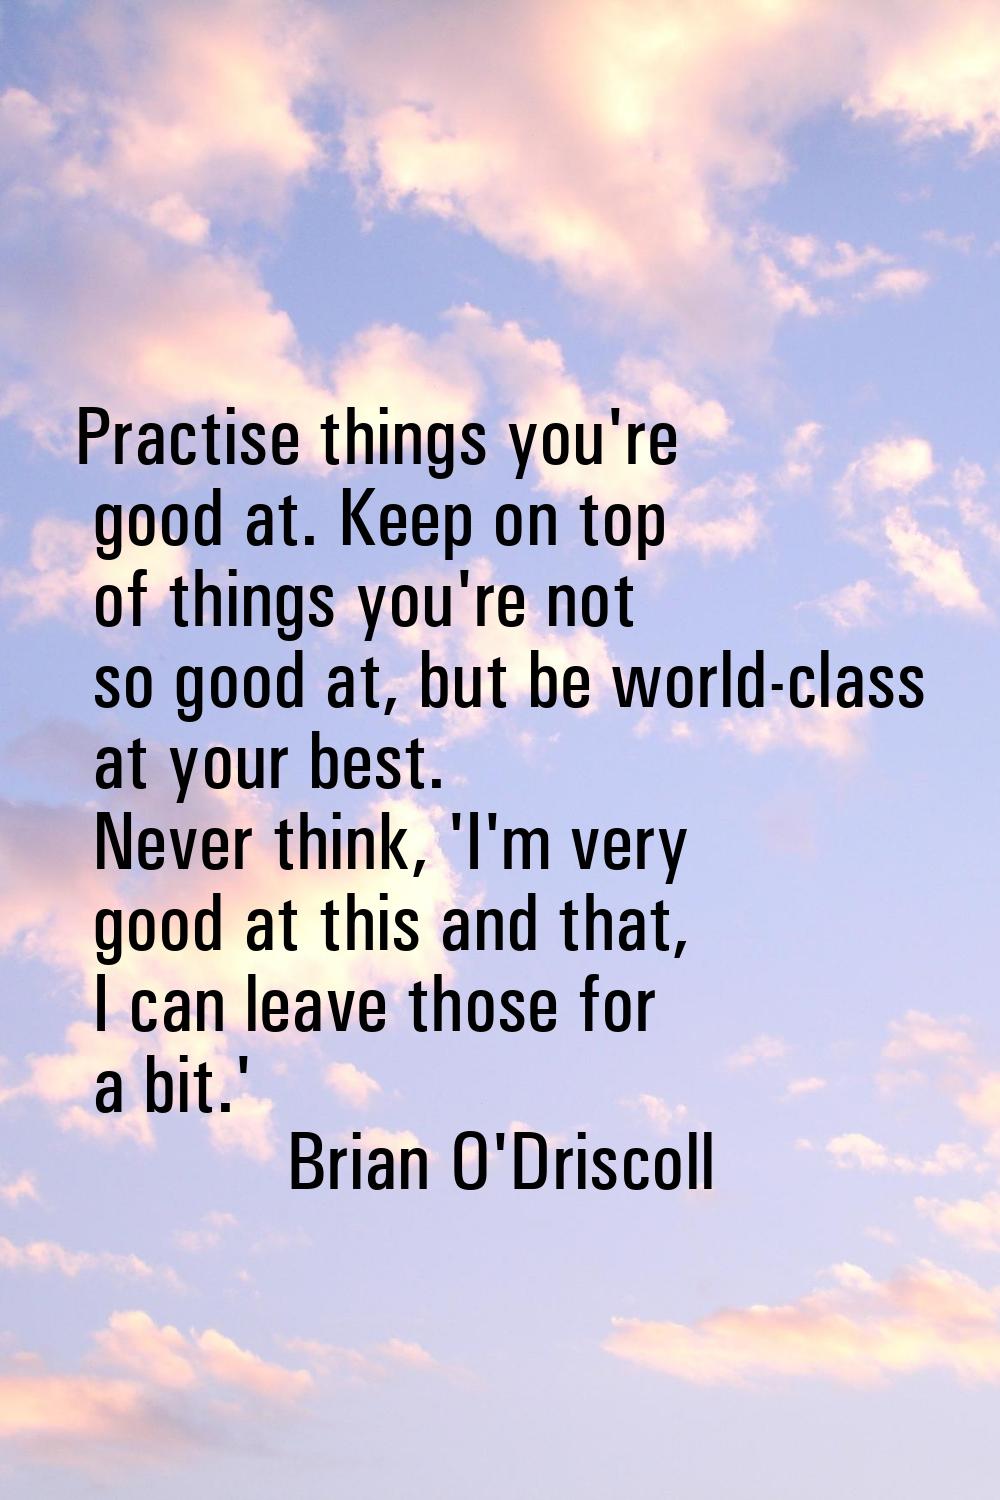 Practise things you're good at. Keep on top of things you're not so good at, but be world-class at 